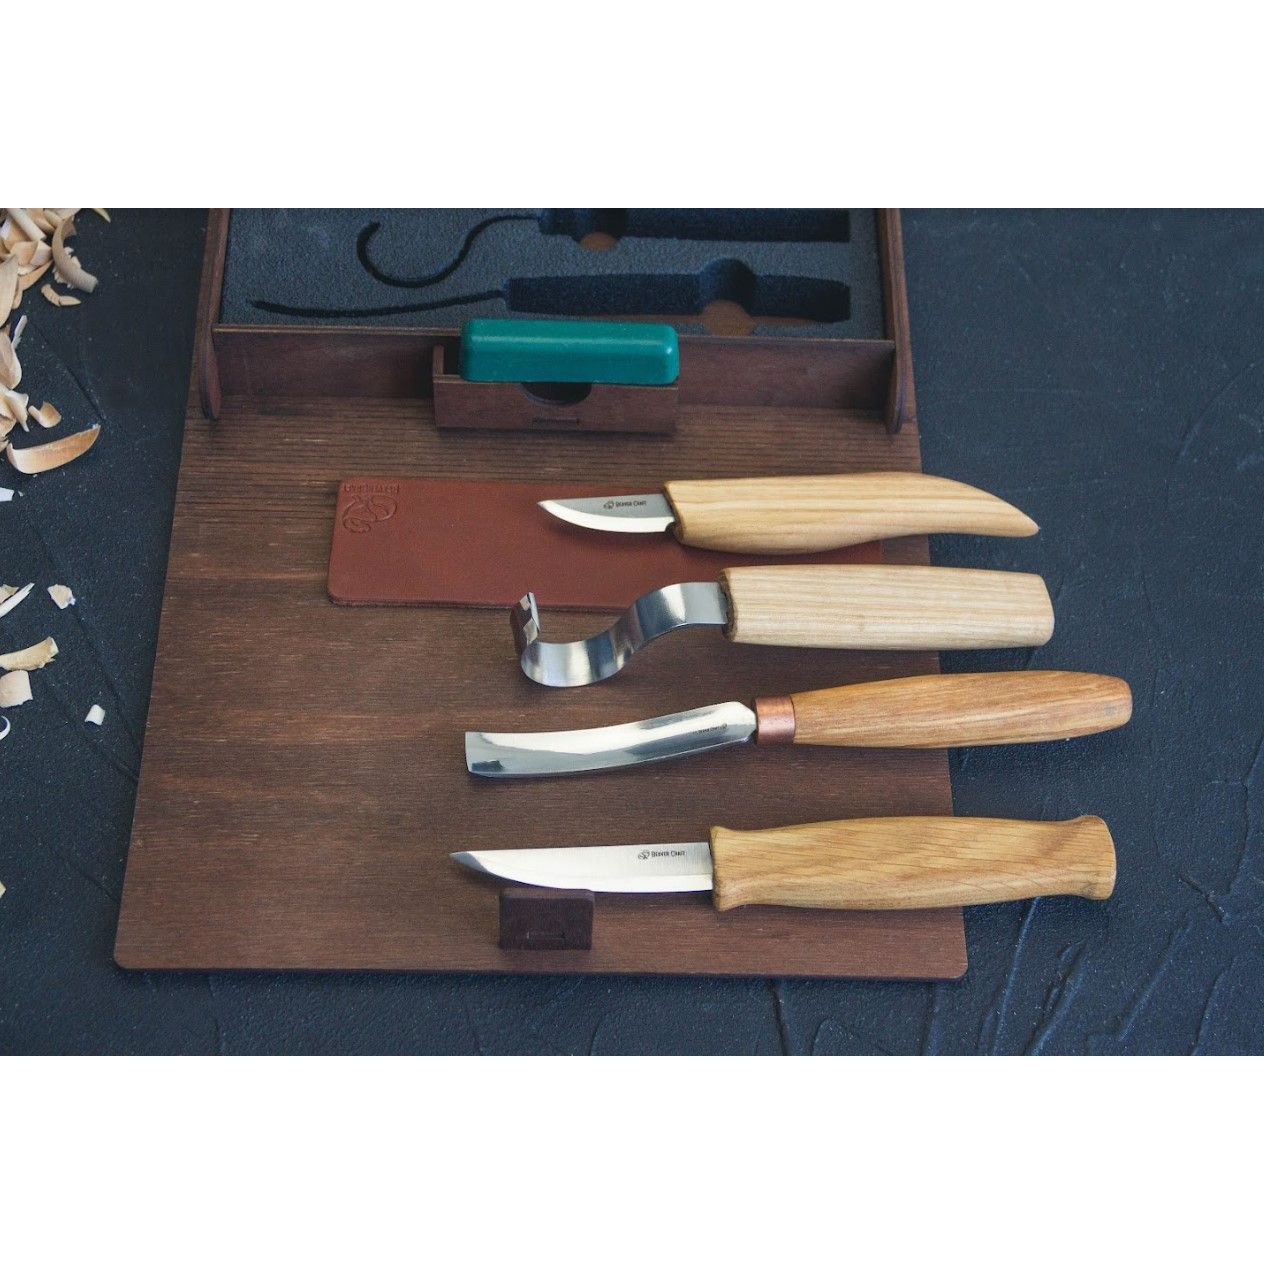 BeaverCraft Spoon and Kuksa Carving Professional Set in Gift Box